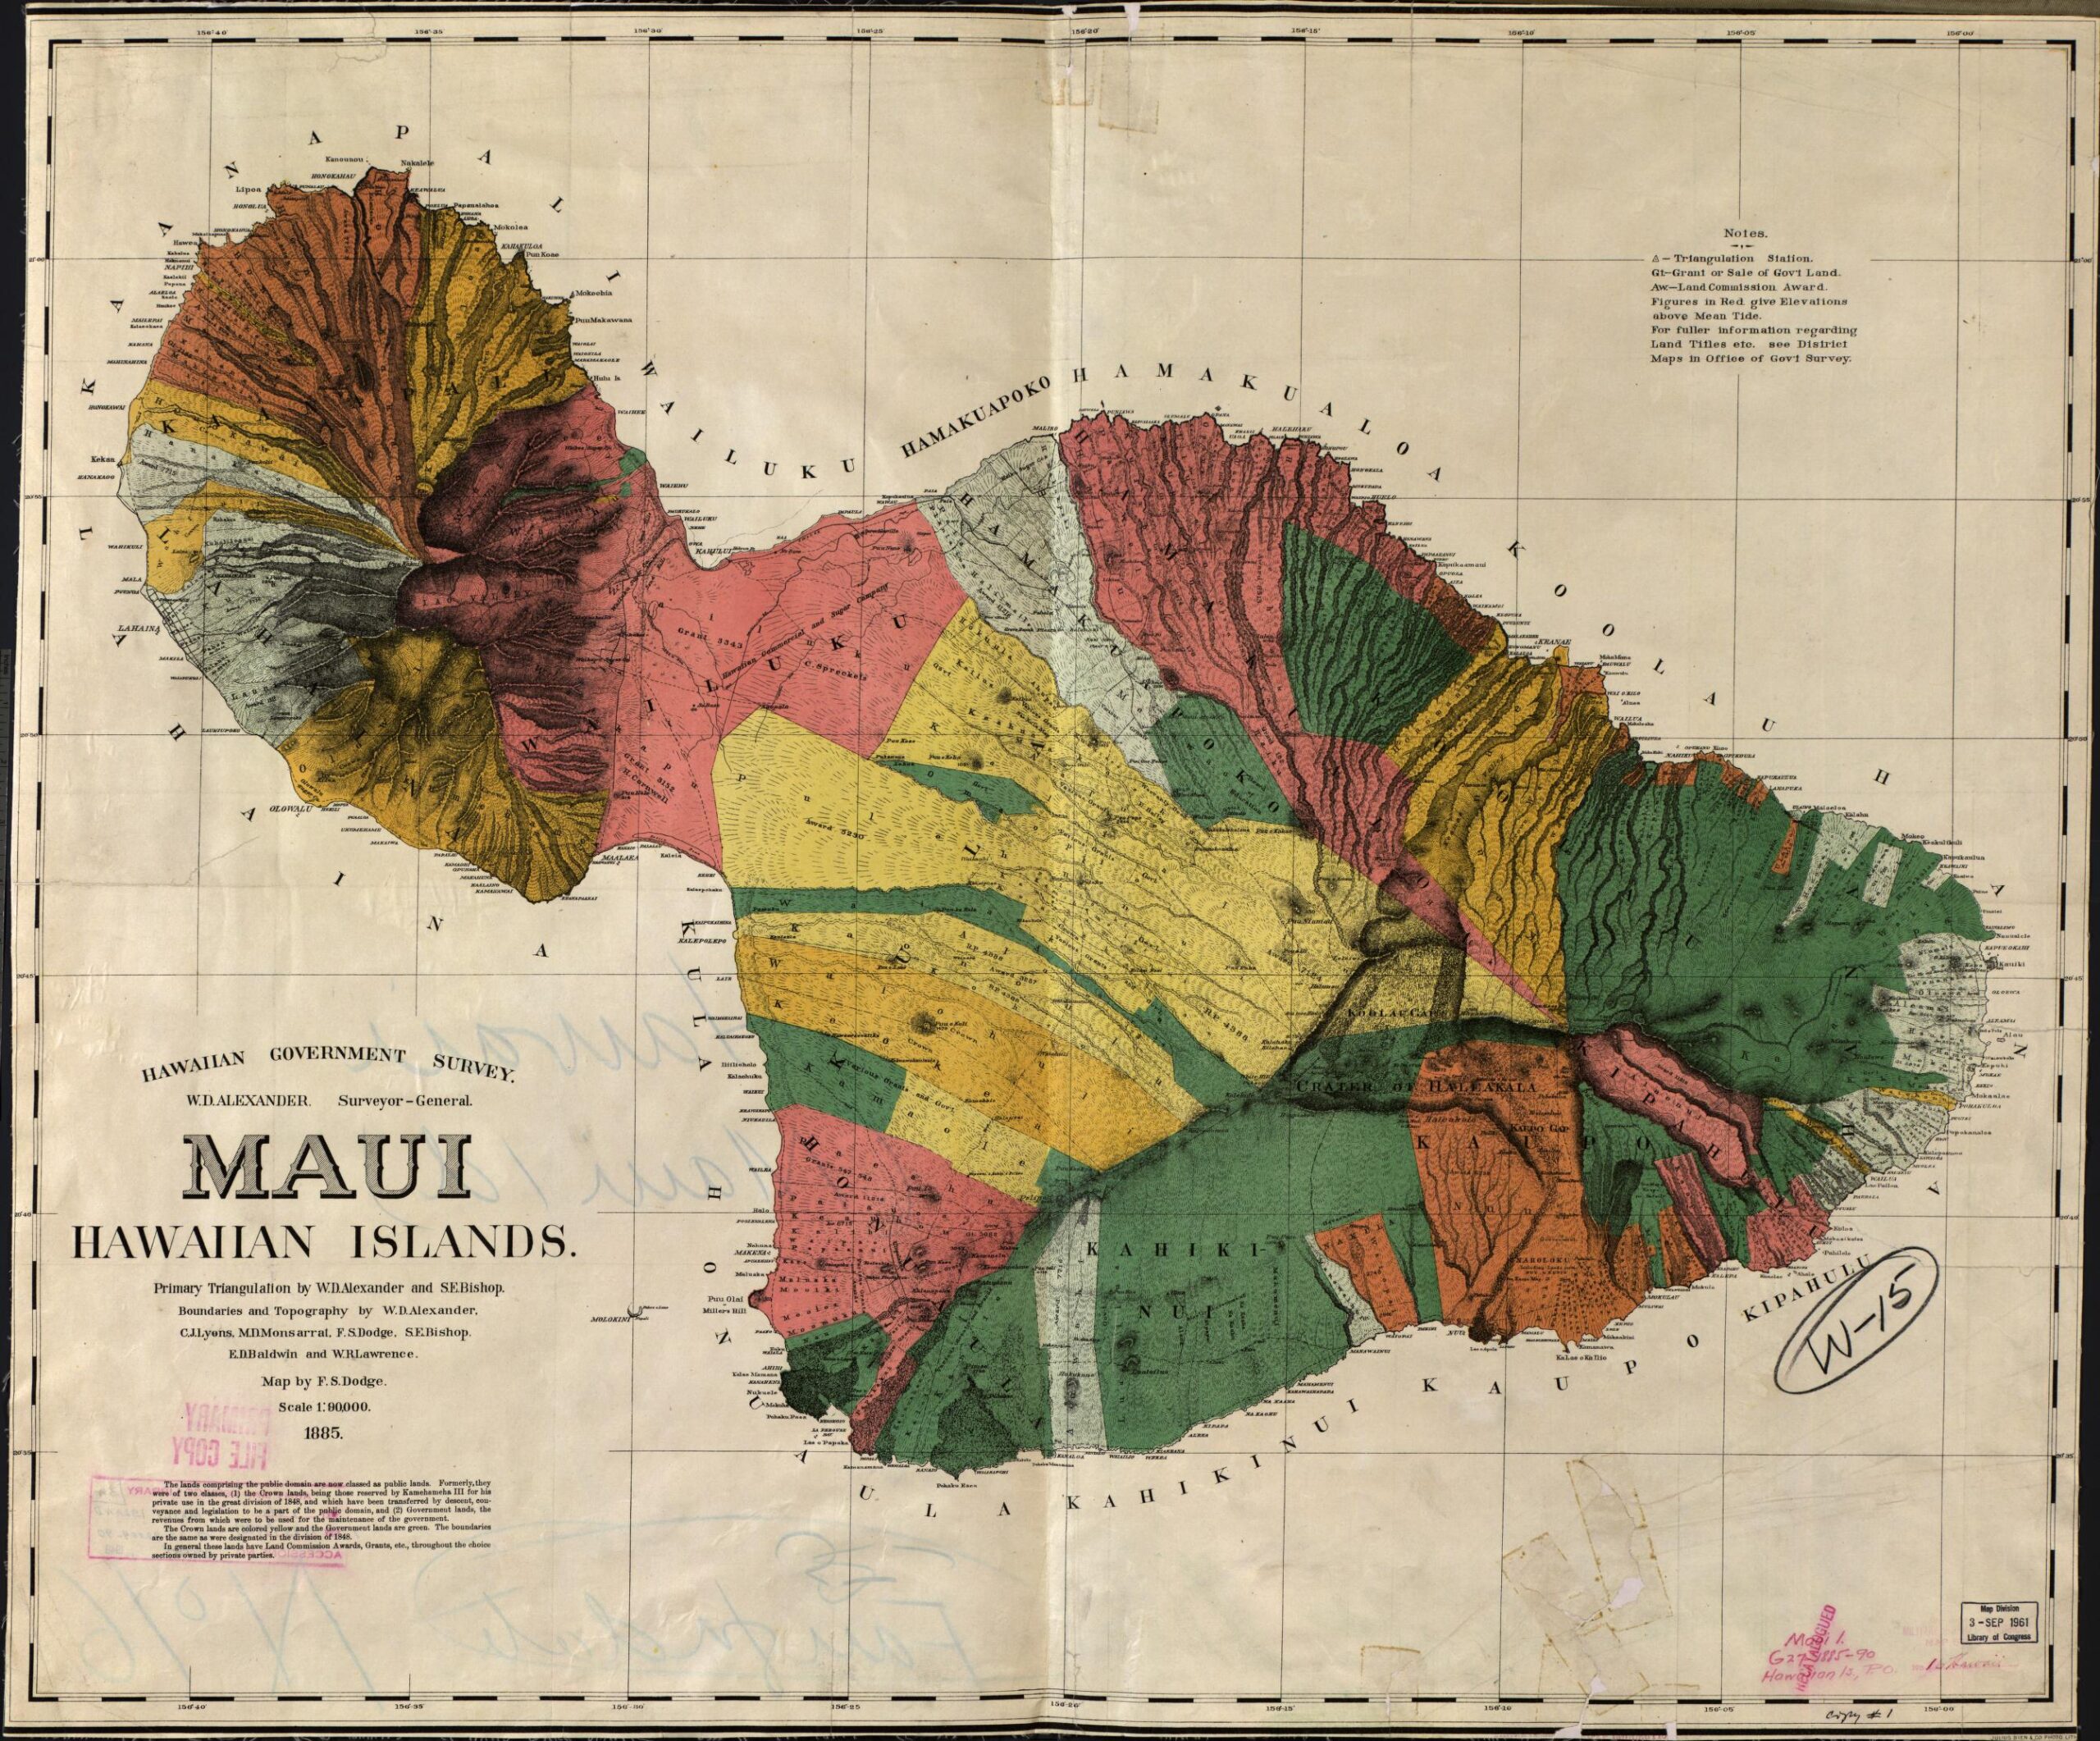 Map of island of Maui showing former crown and government lands as well as private lands.